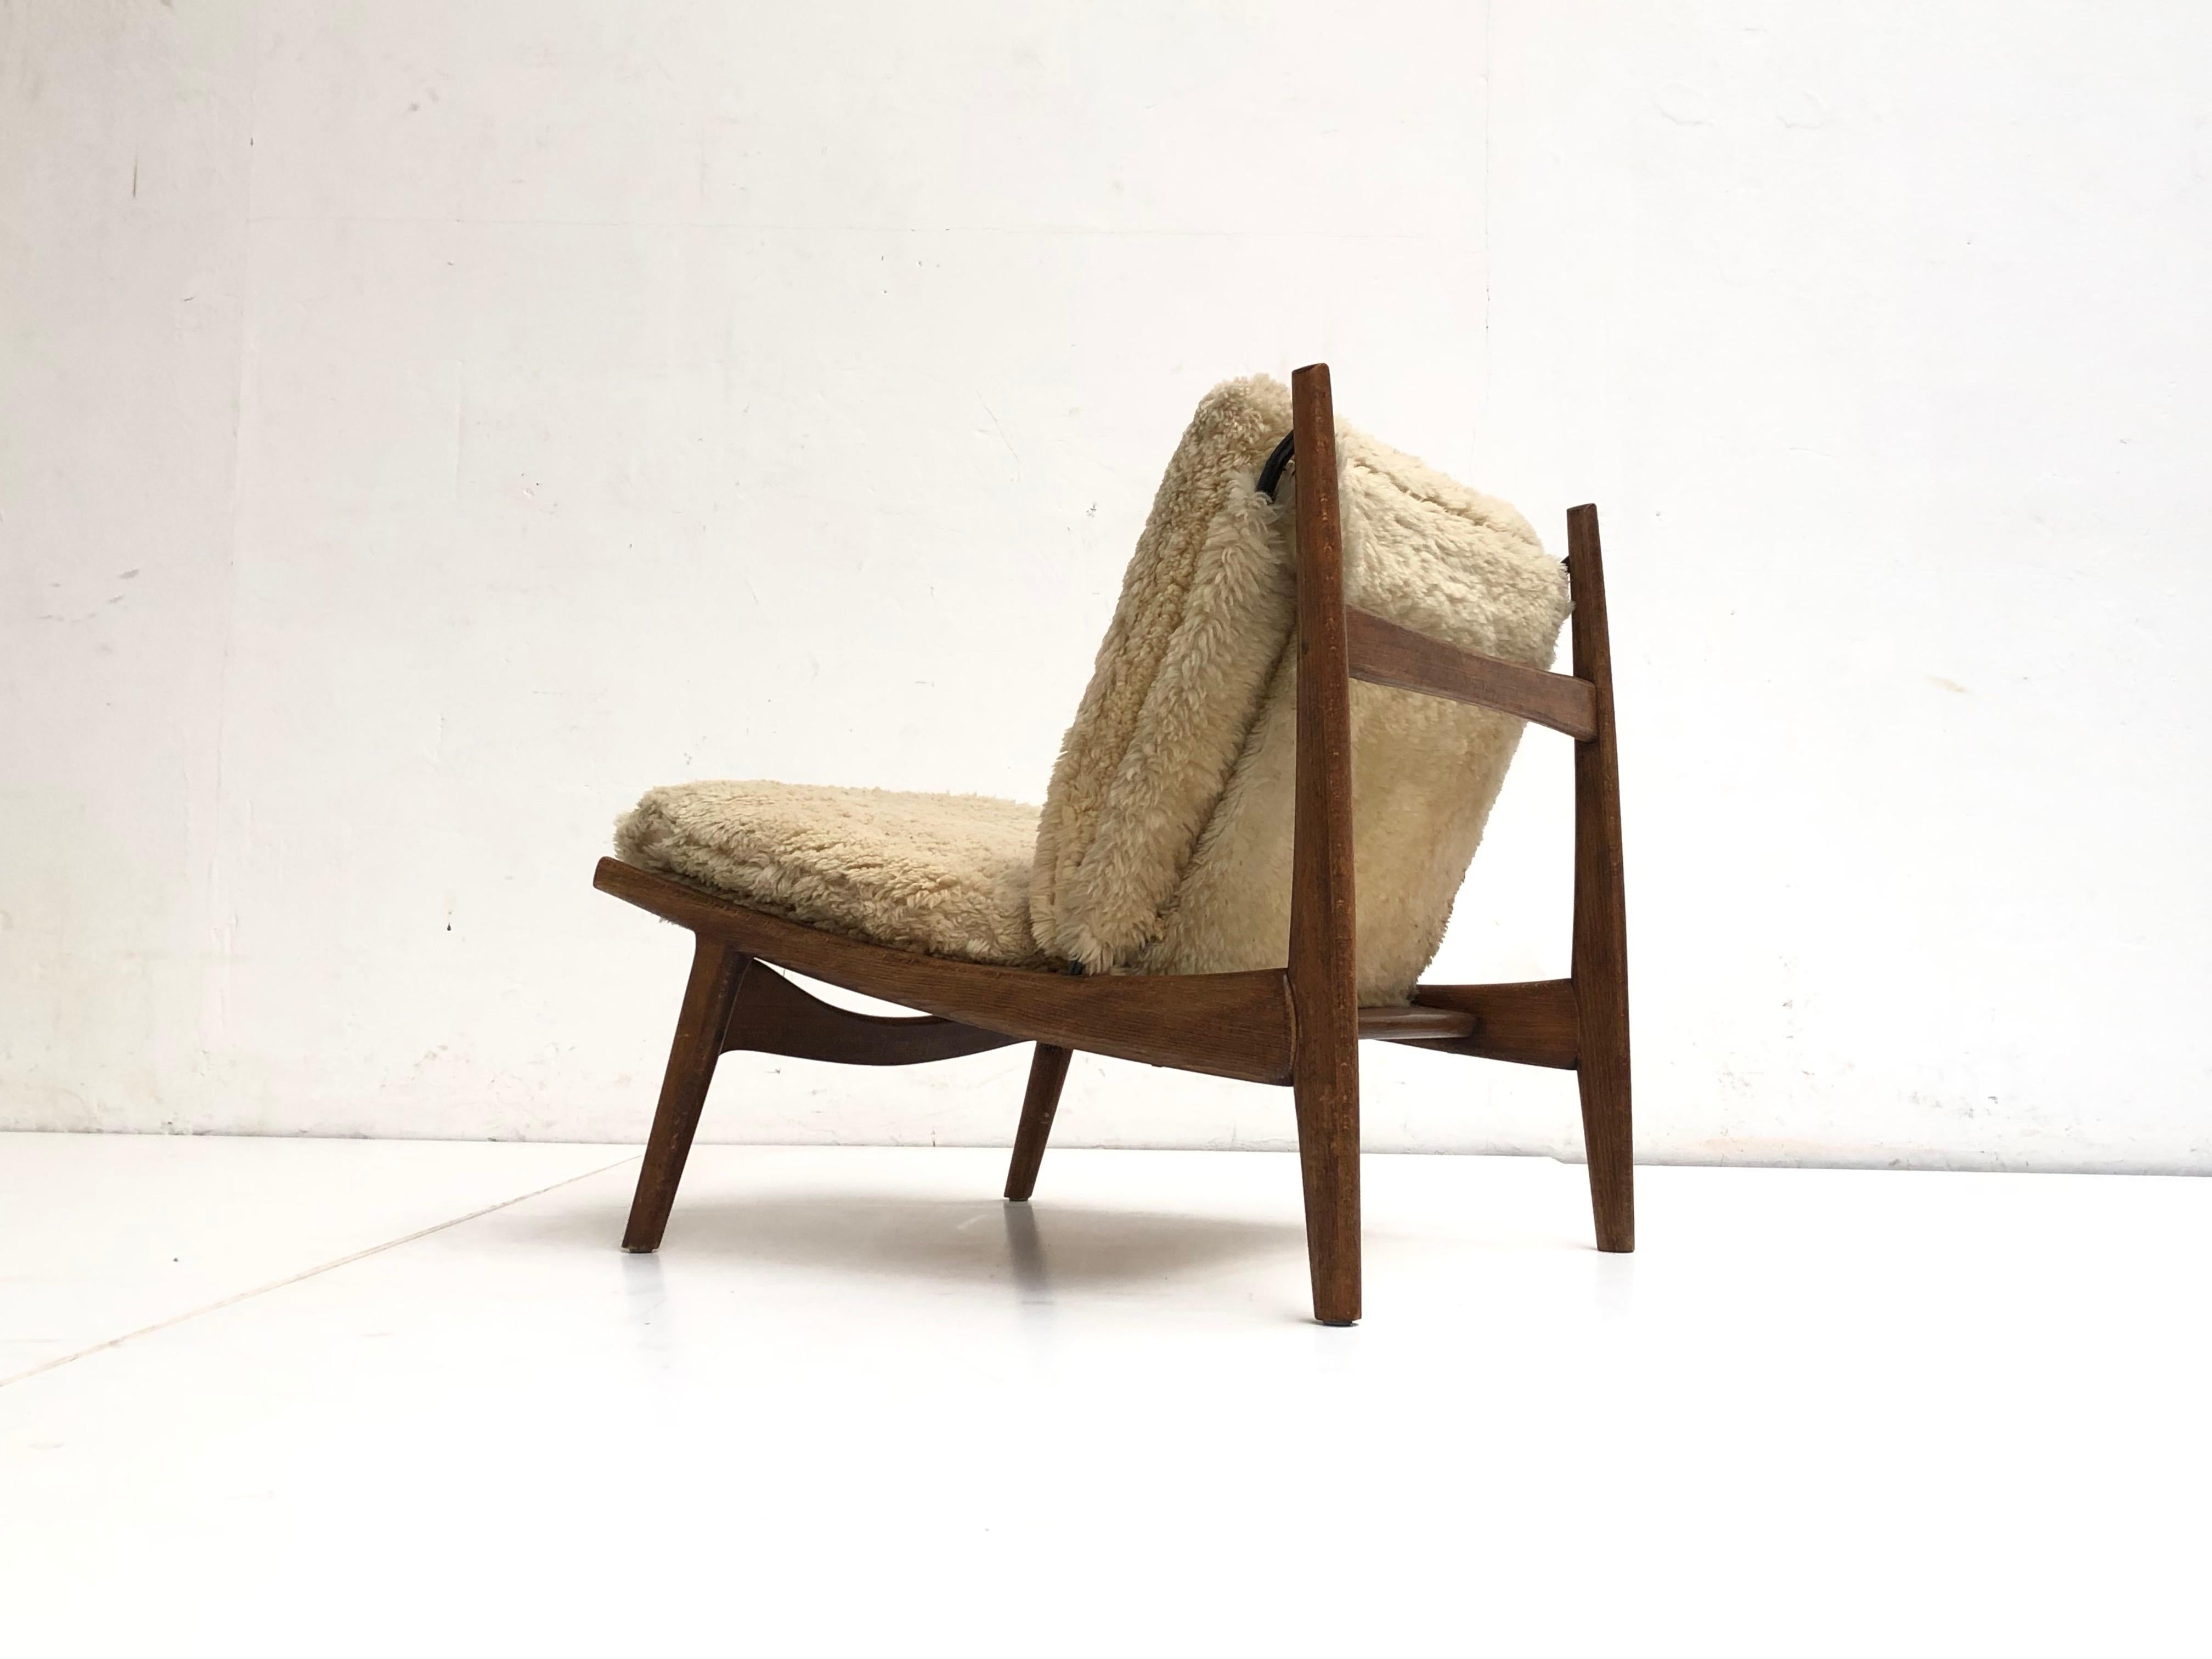 Sheepskin Stunning Organic Form '790' Lounge Chair by J.A Motte for Steiner, France, 1960